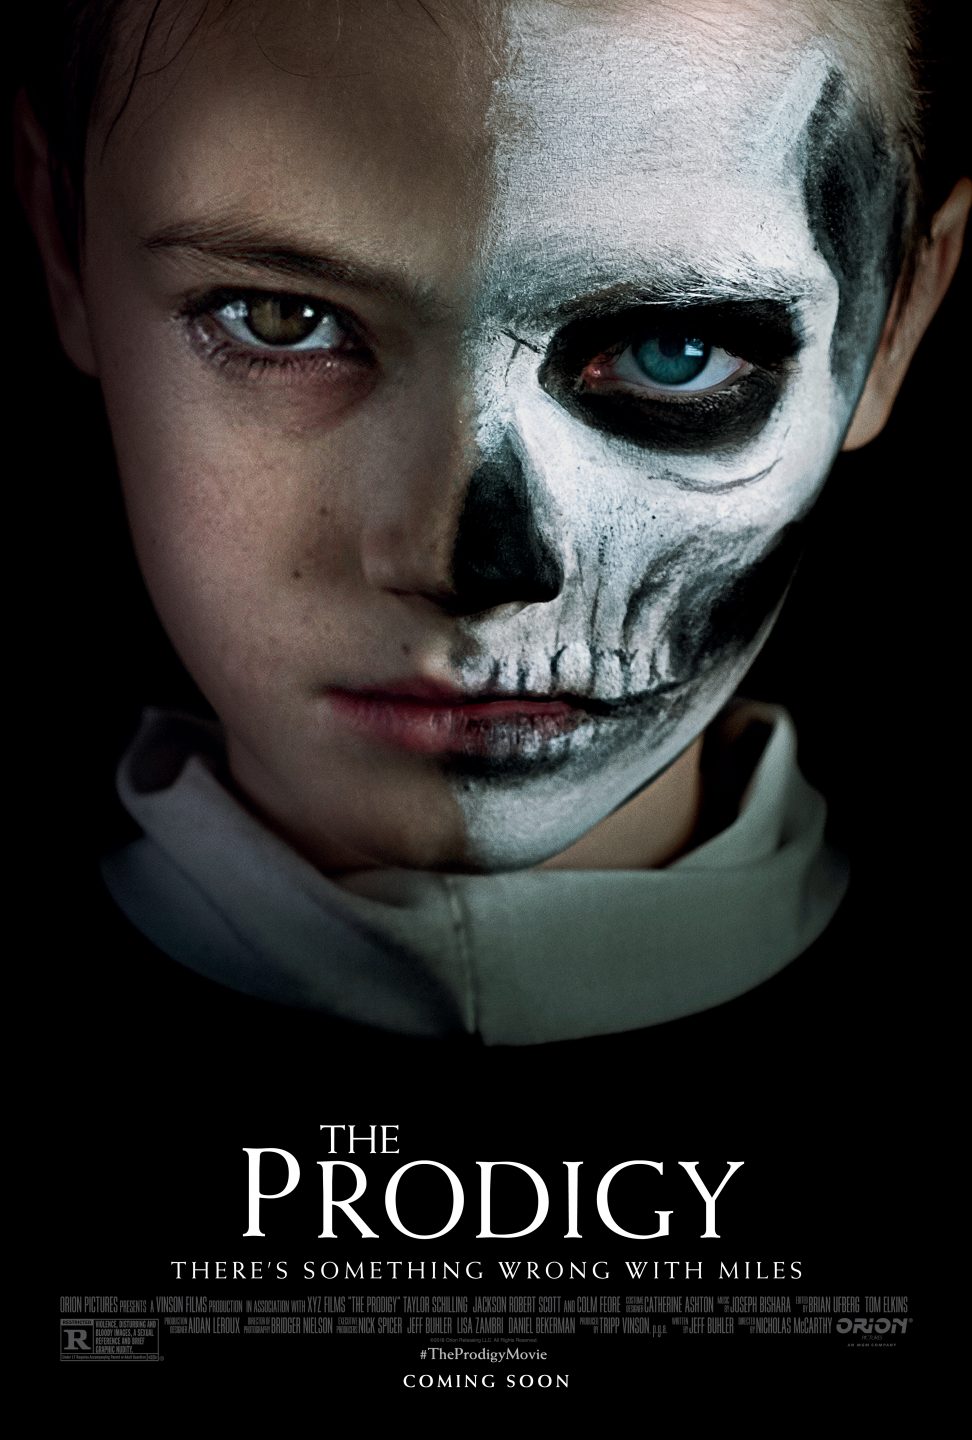 The Prodigy poster (Orion Pictures)